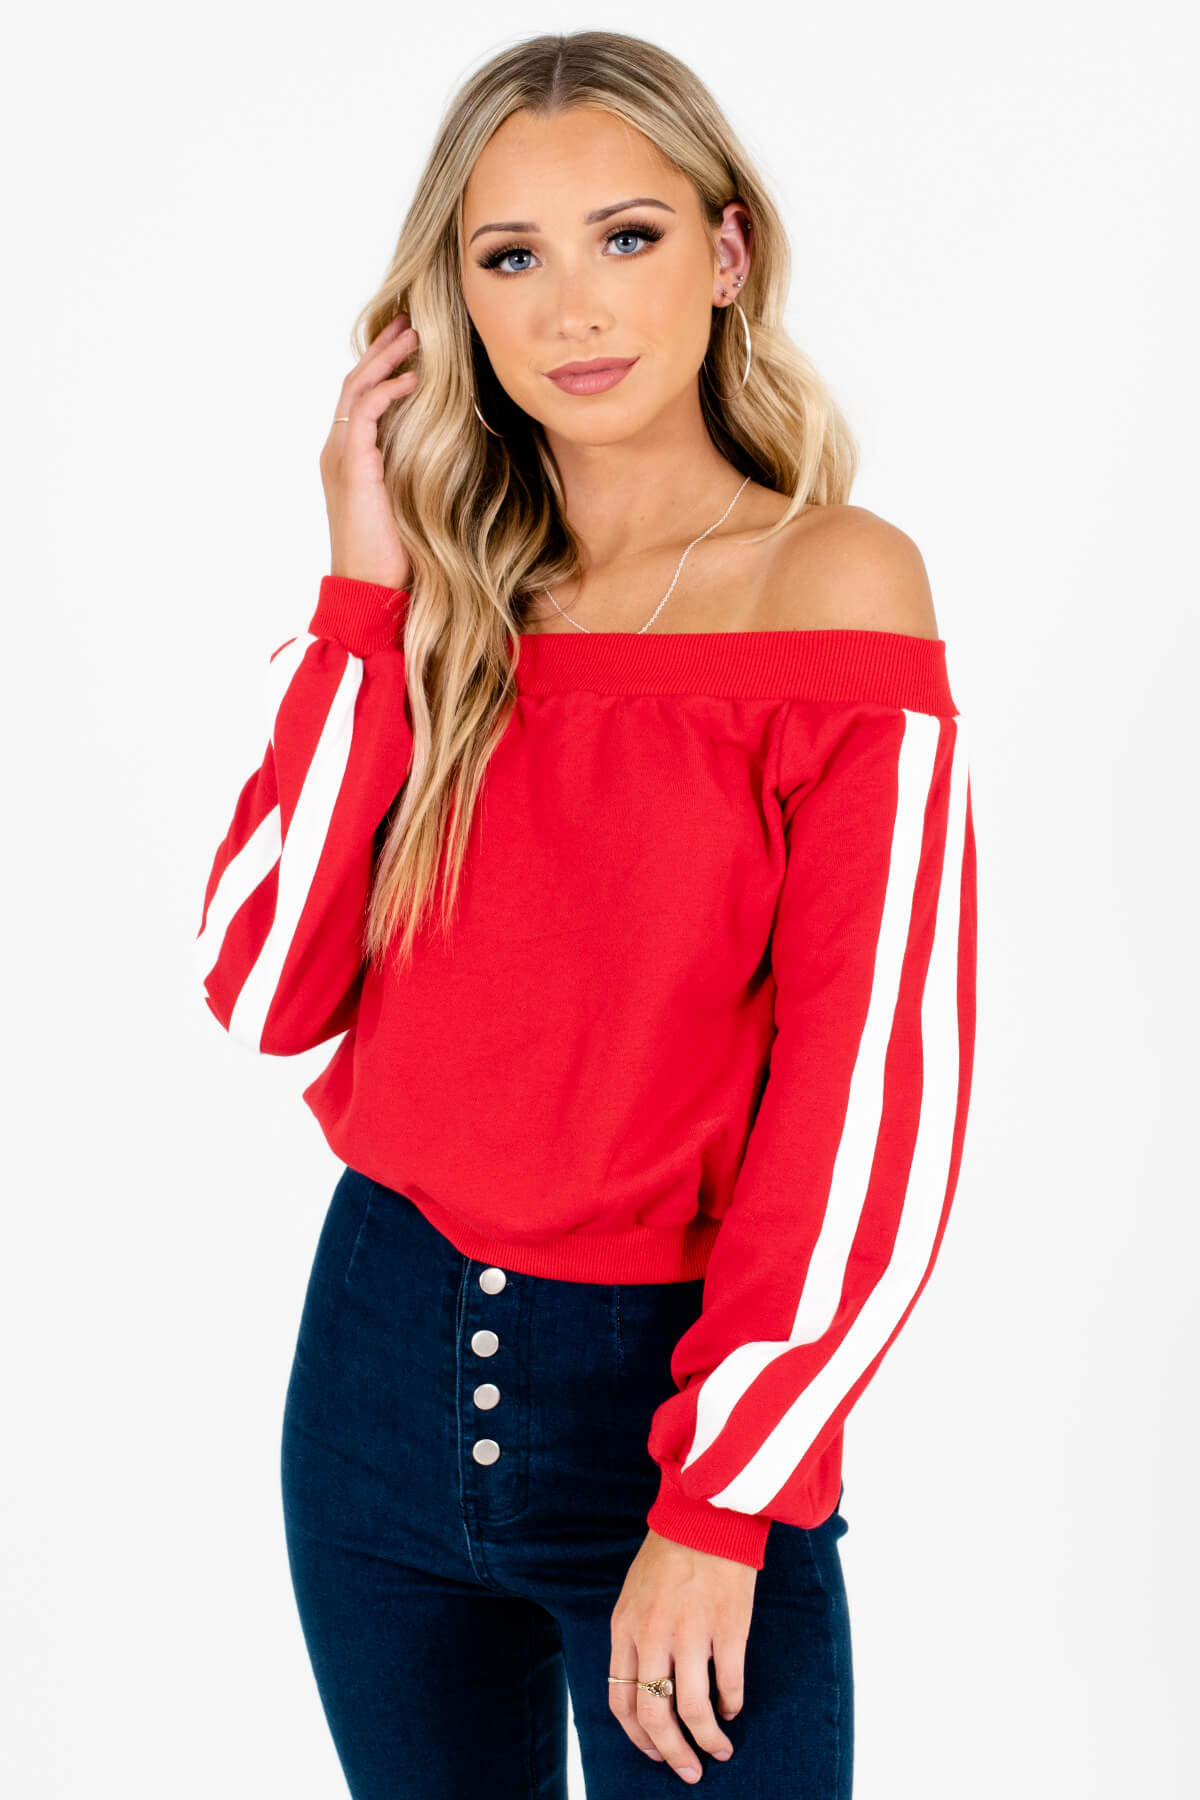 Red with White Sleeve Stripes Boutique Pullovers for Women